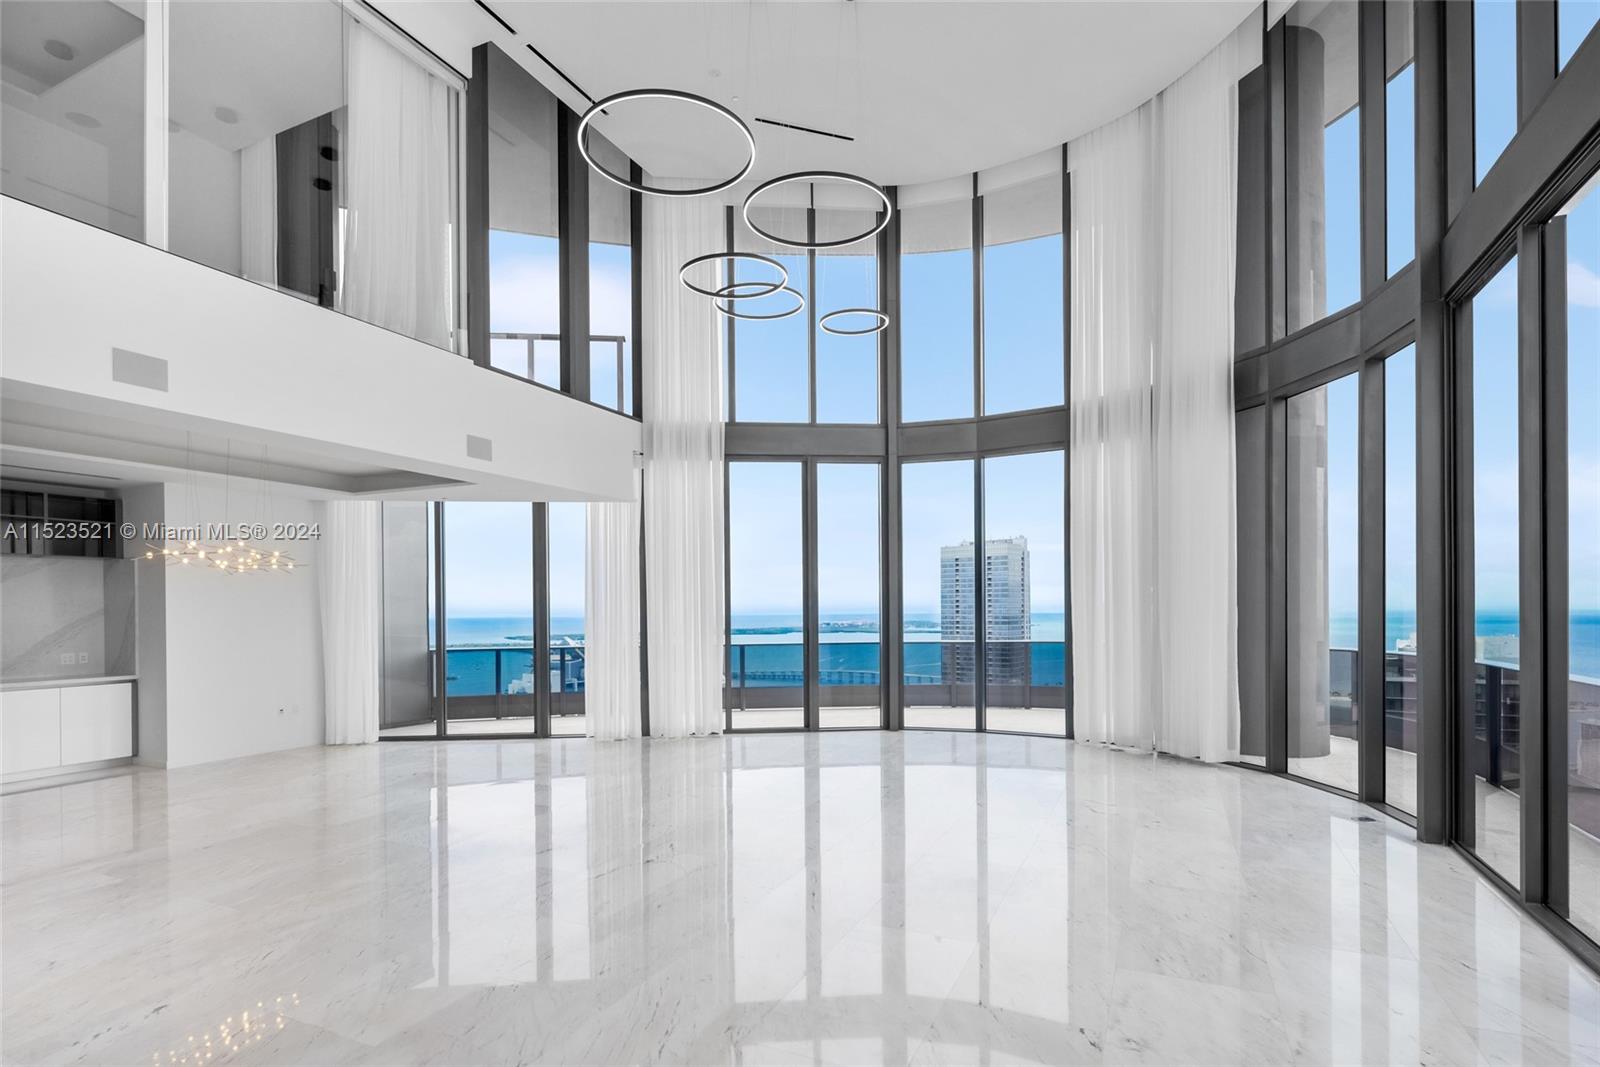 Experience ultimate luxury in this 5173 sq. ft. tri-level penthouse at The Brickell Flatiron. With 6 bedrooms and 5.5 bathrooms, indulge in spacious living. The private pool deck offers 180-degree views, an outdoor kitchen, and an ideal space for gatherings. Italian marble flooring adds opulence. Enjoy 3 assigned parking spaces, valet parking, and exclusive amenities: roof deck, playground, doorman, concierge, gym, playroom, billiards, 2 heated pools, game room, business center. Revel in highrise living near Miami's finest dining, shopping, and entertainment. Rare Miami luxury awaits! Completed April 2024.